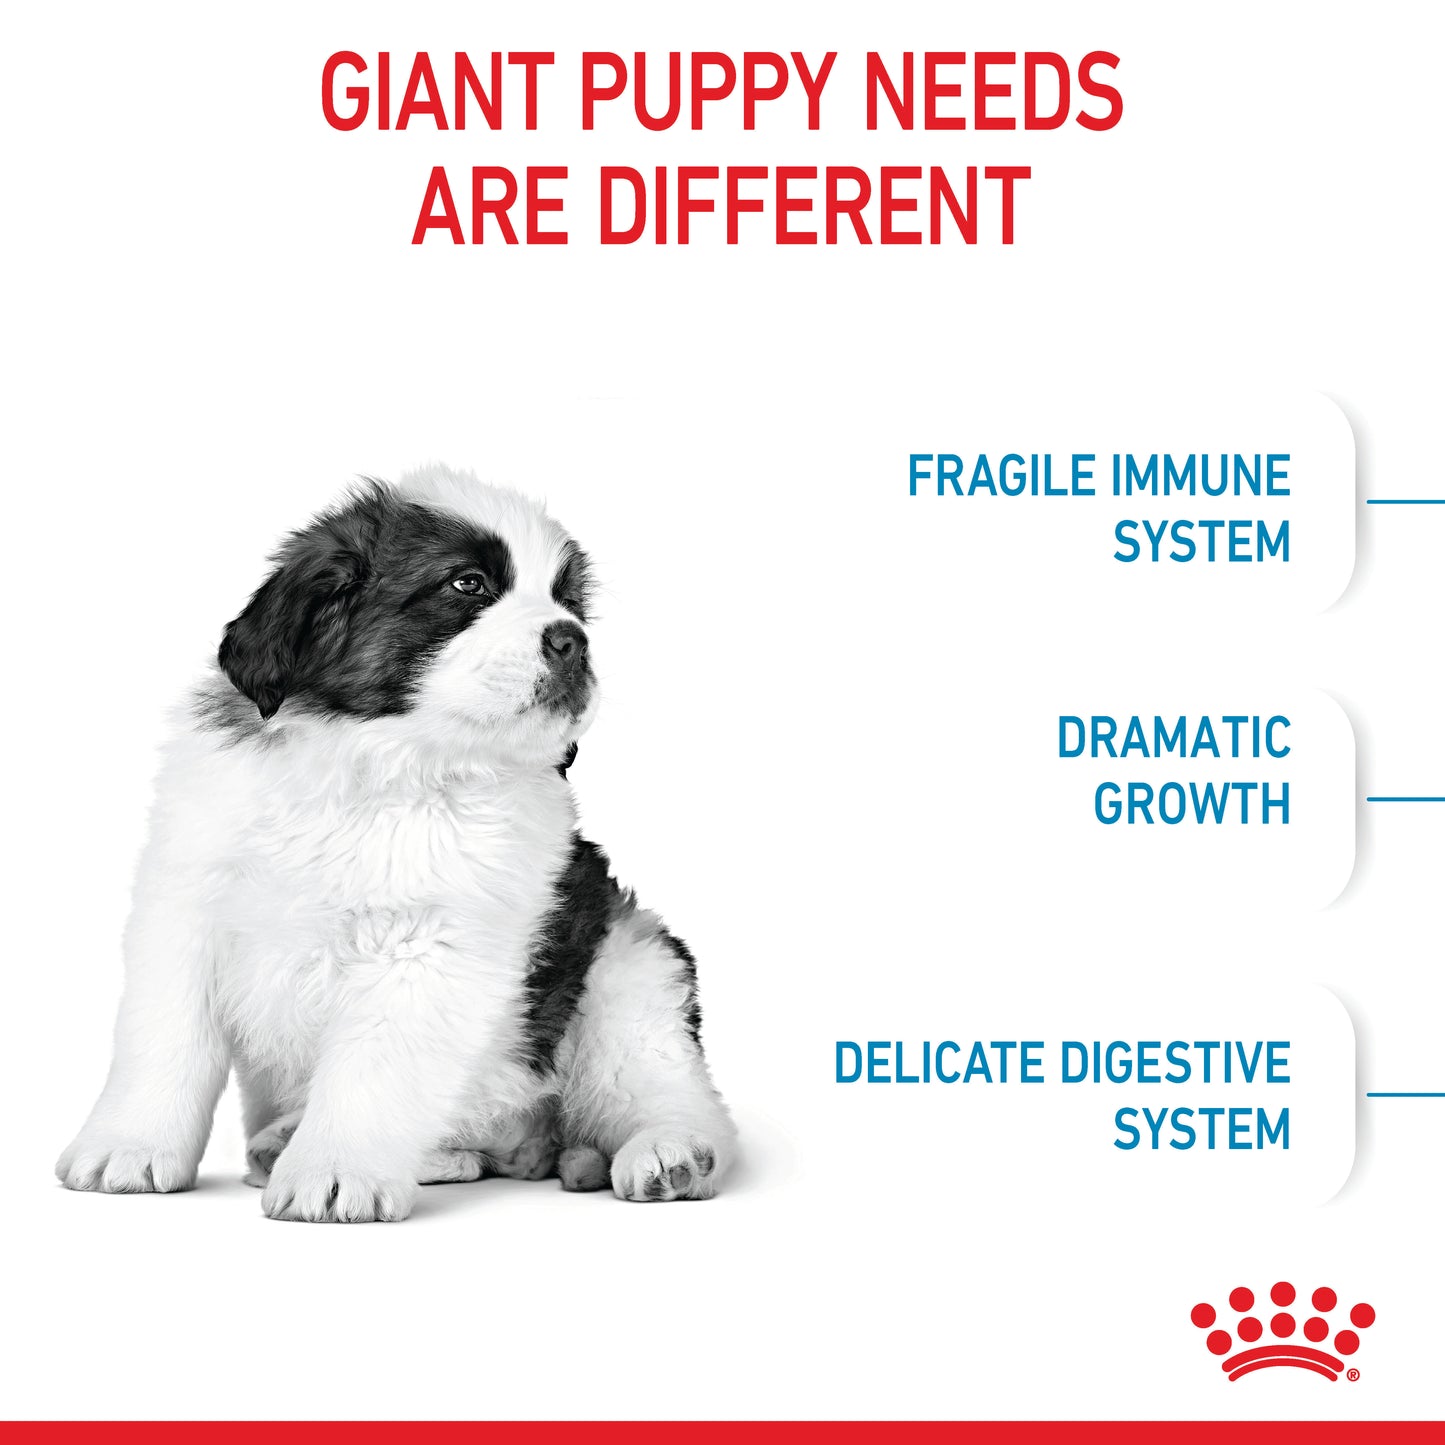 Royal Canin Giant Dry Puppy Food